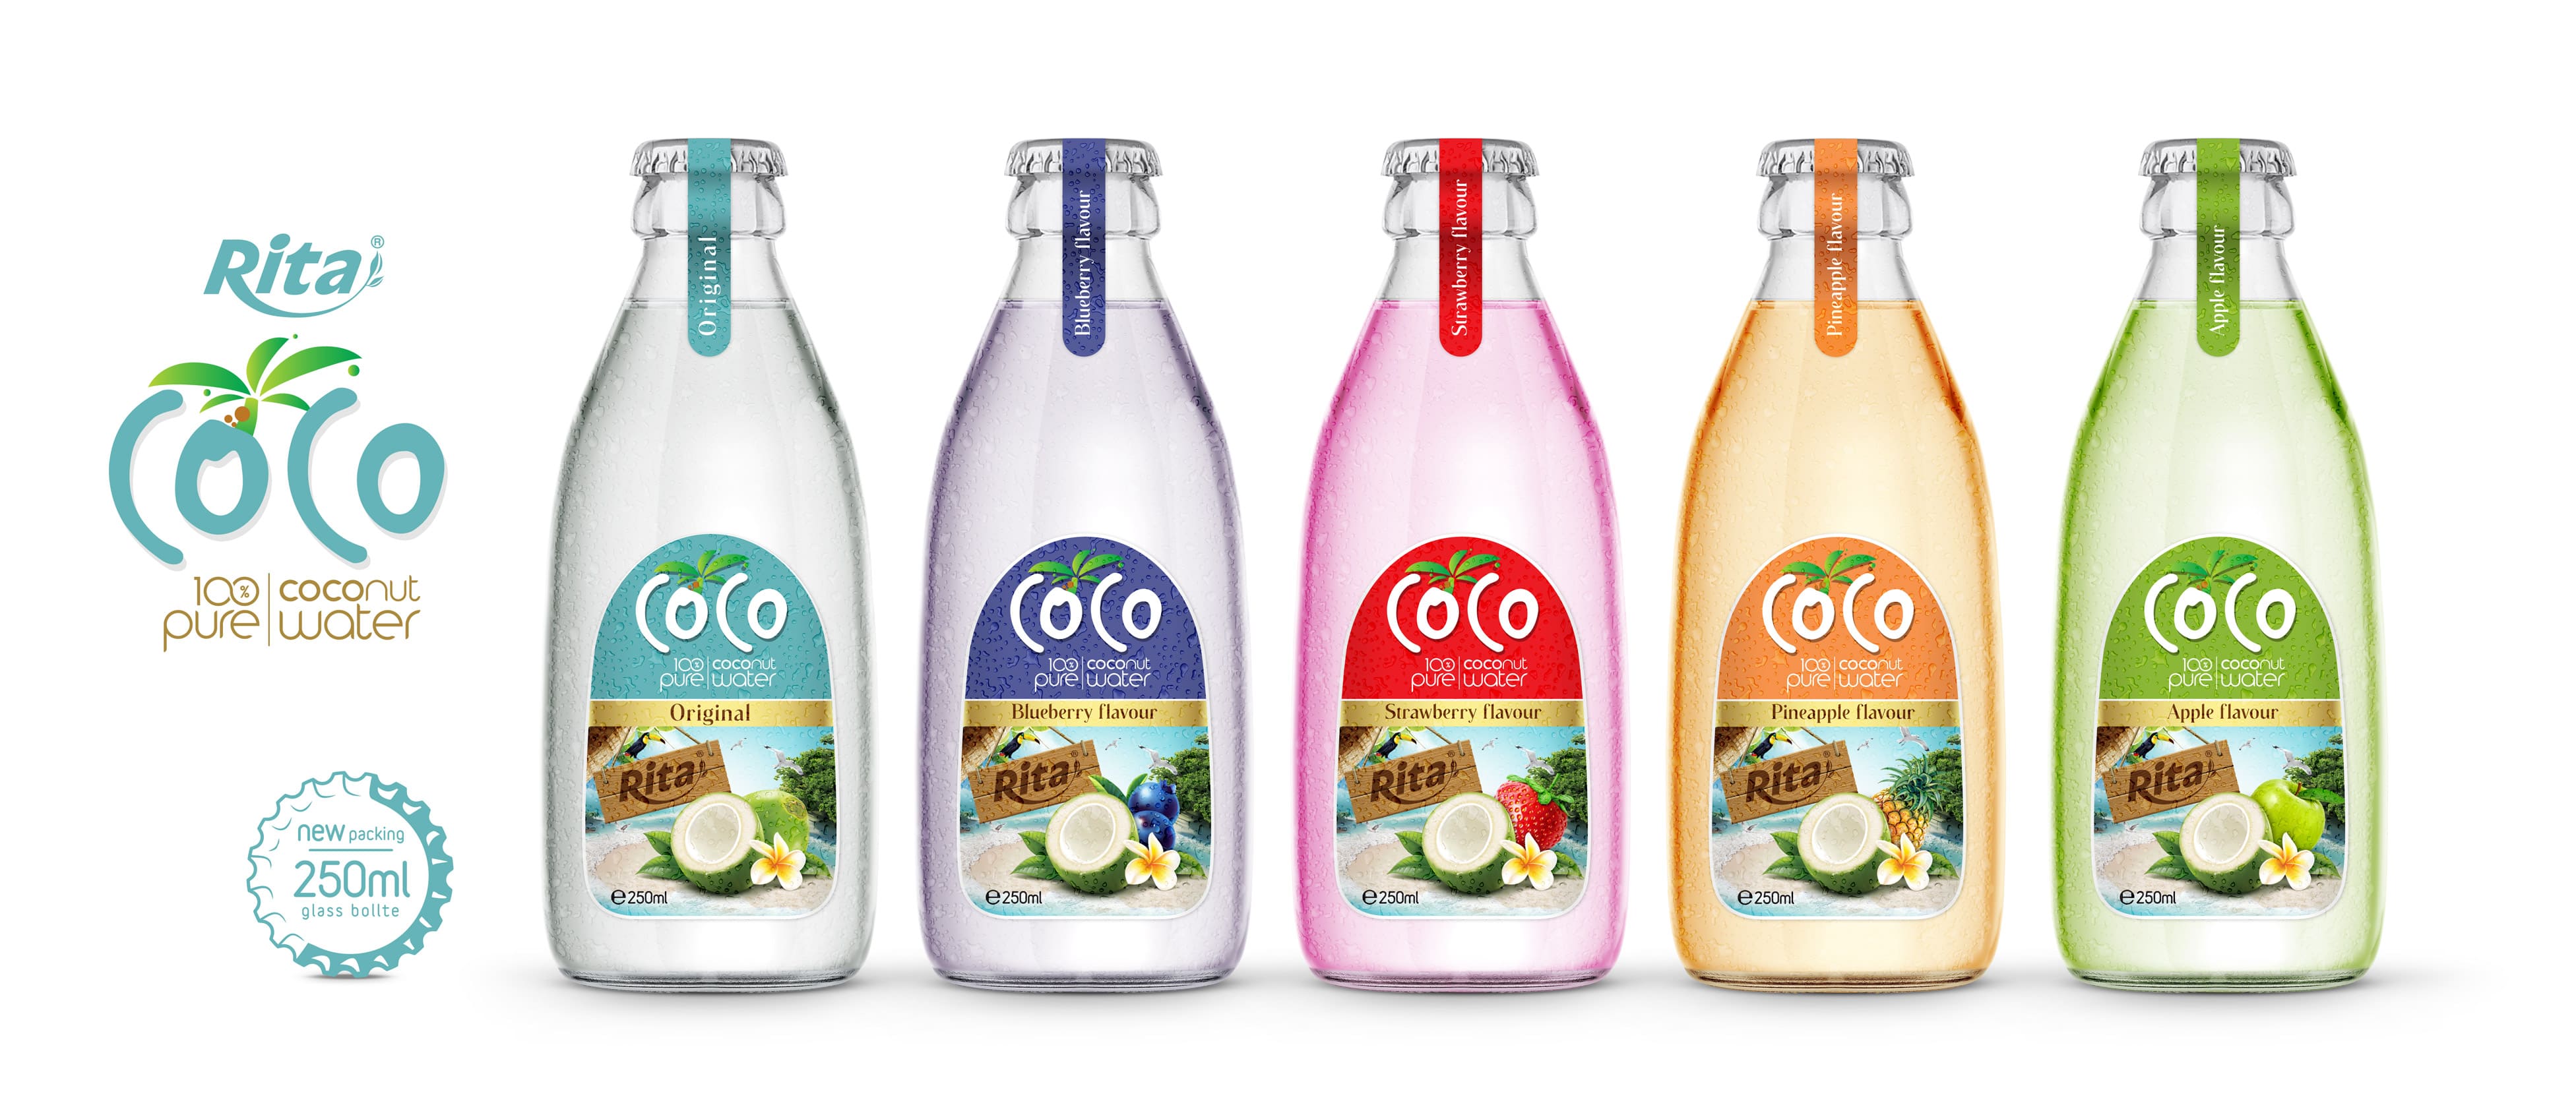 Poster 250ml glass bottle Coco water min